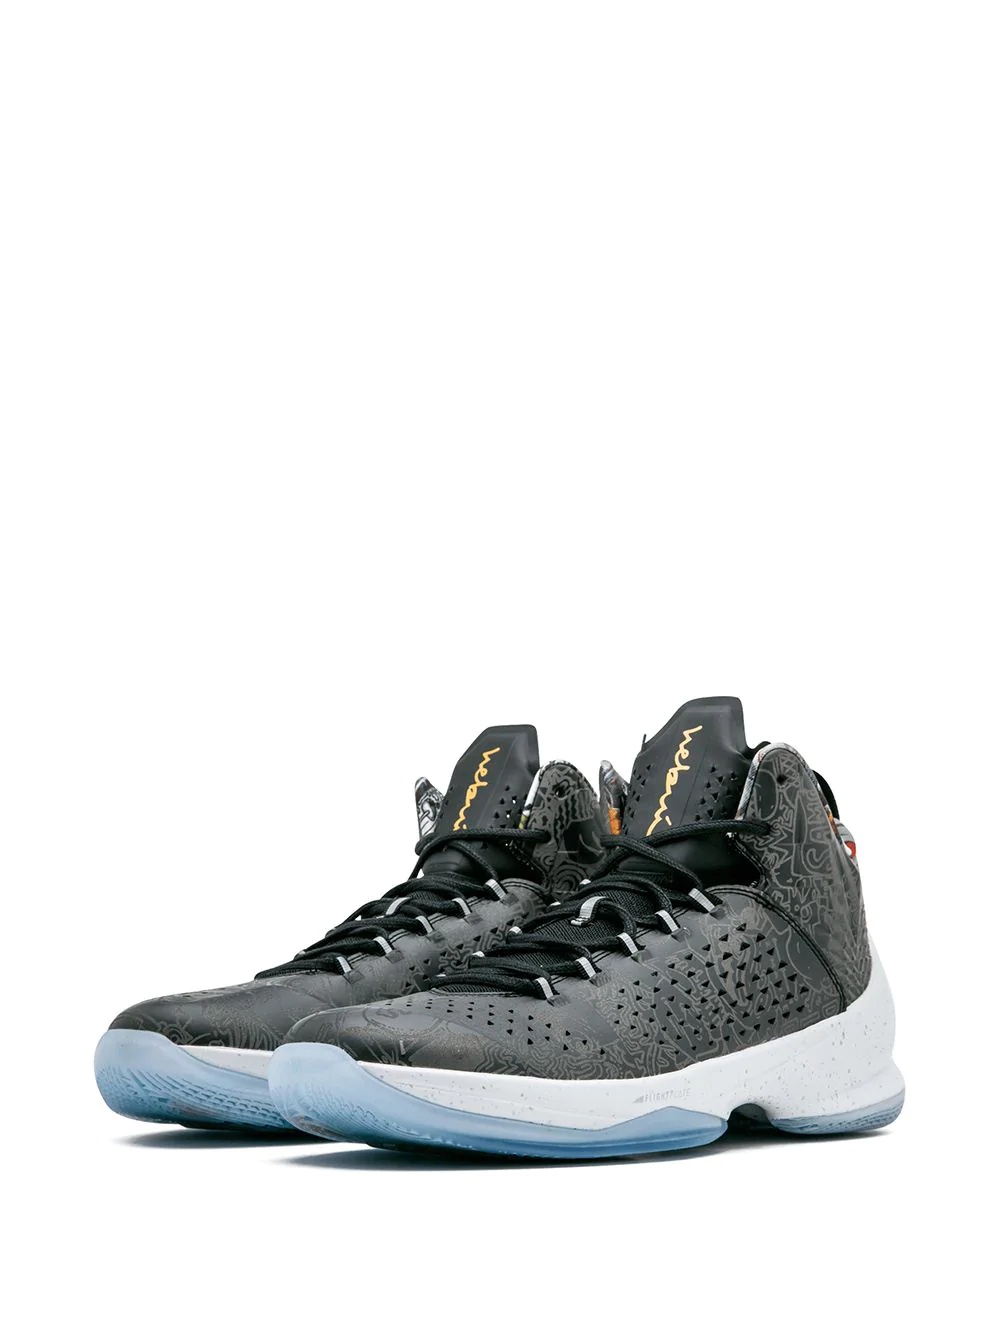 Melo M11 sneakers - 2